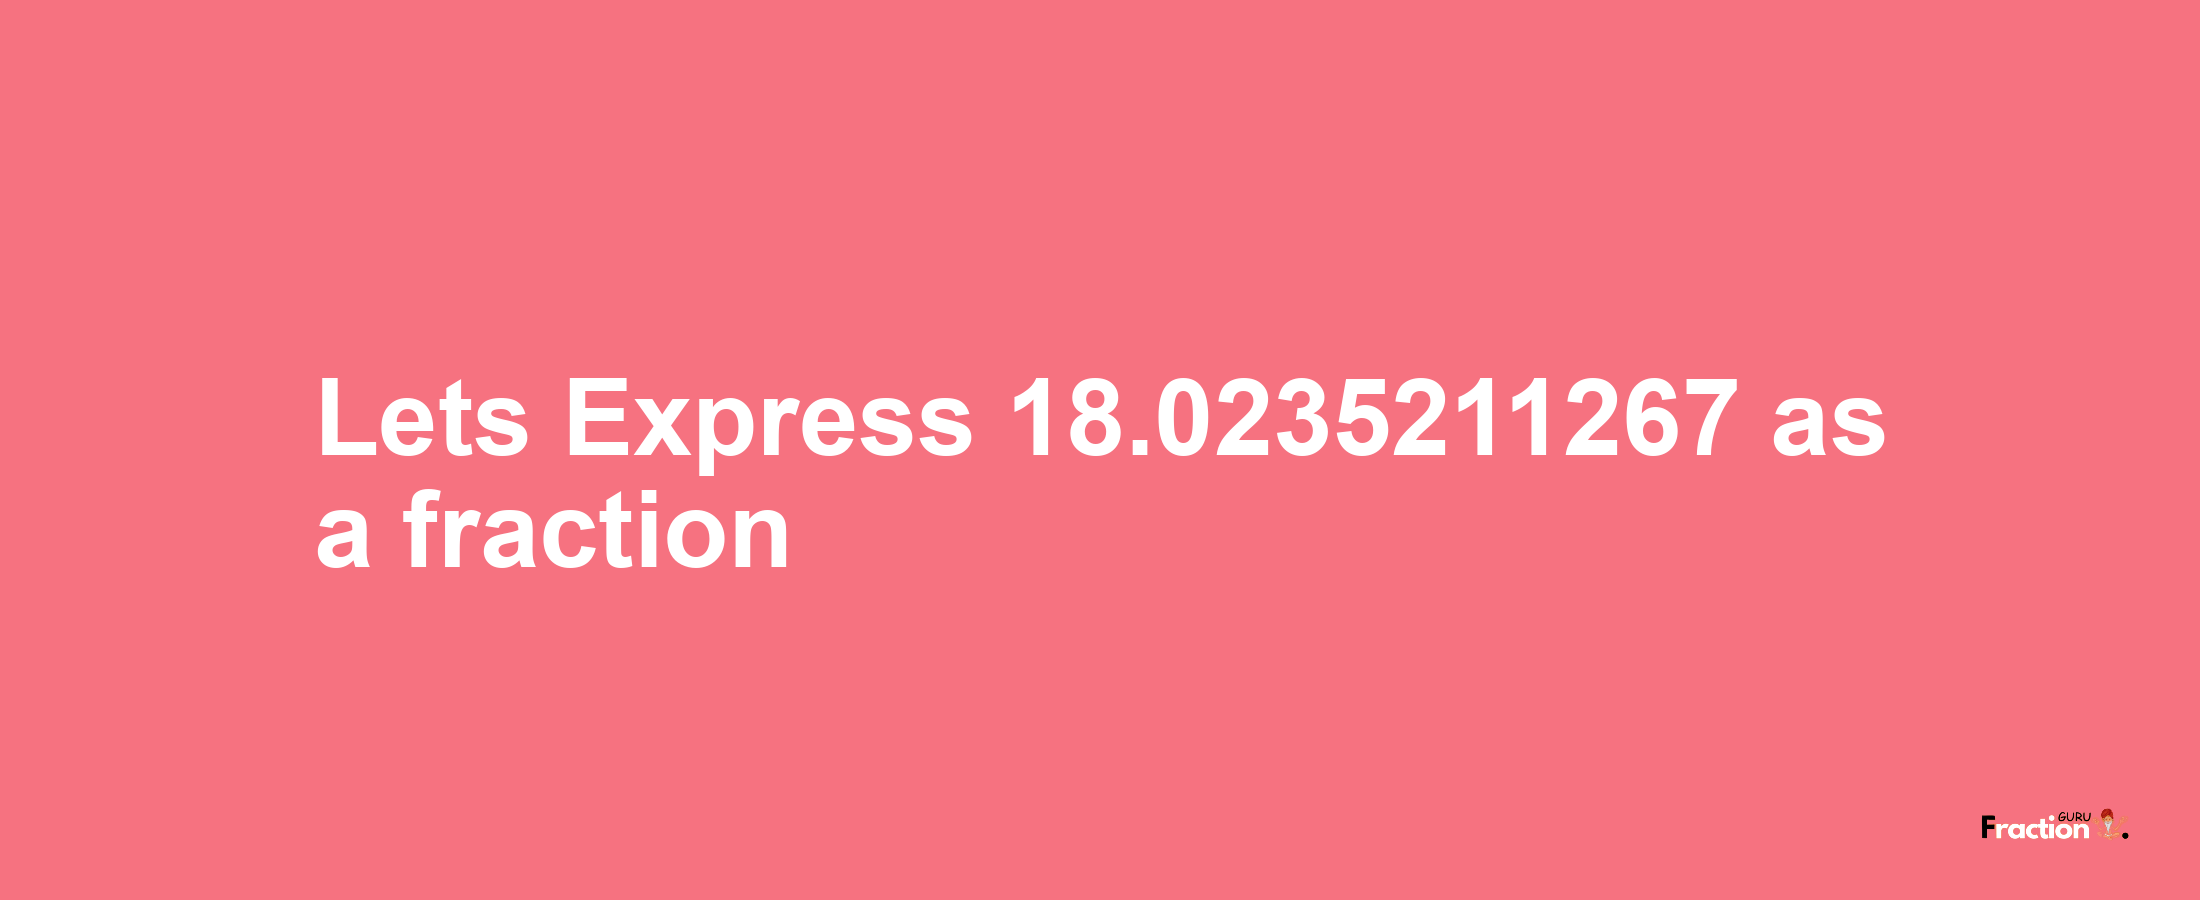 Lets Express 18.0235211267 as afraction